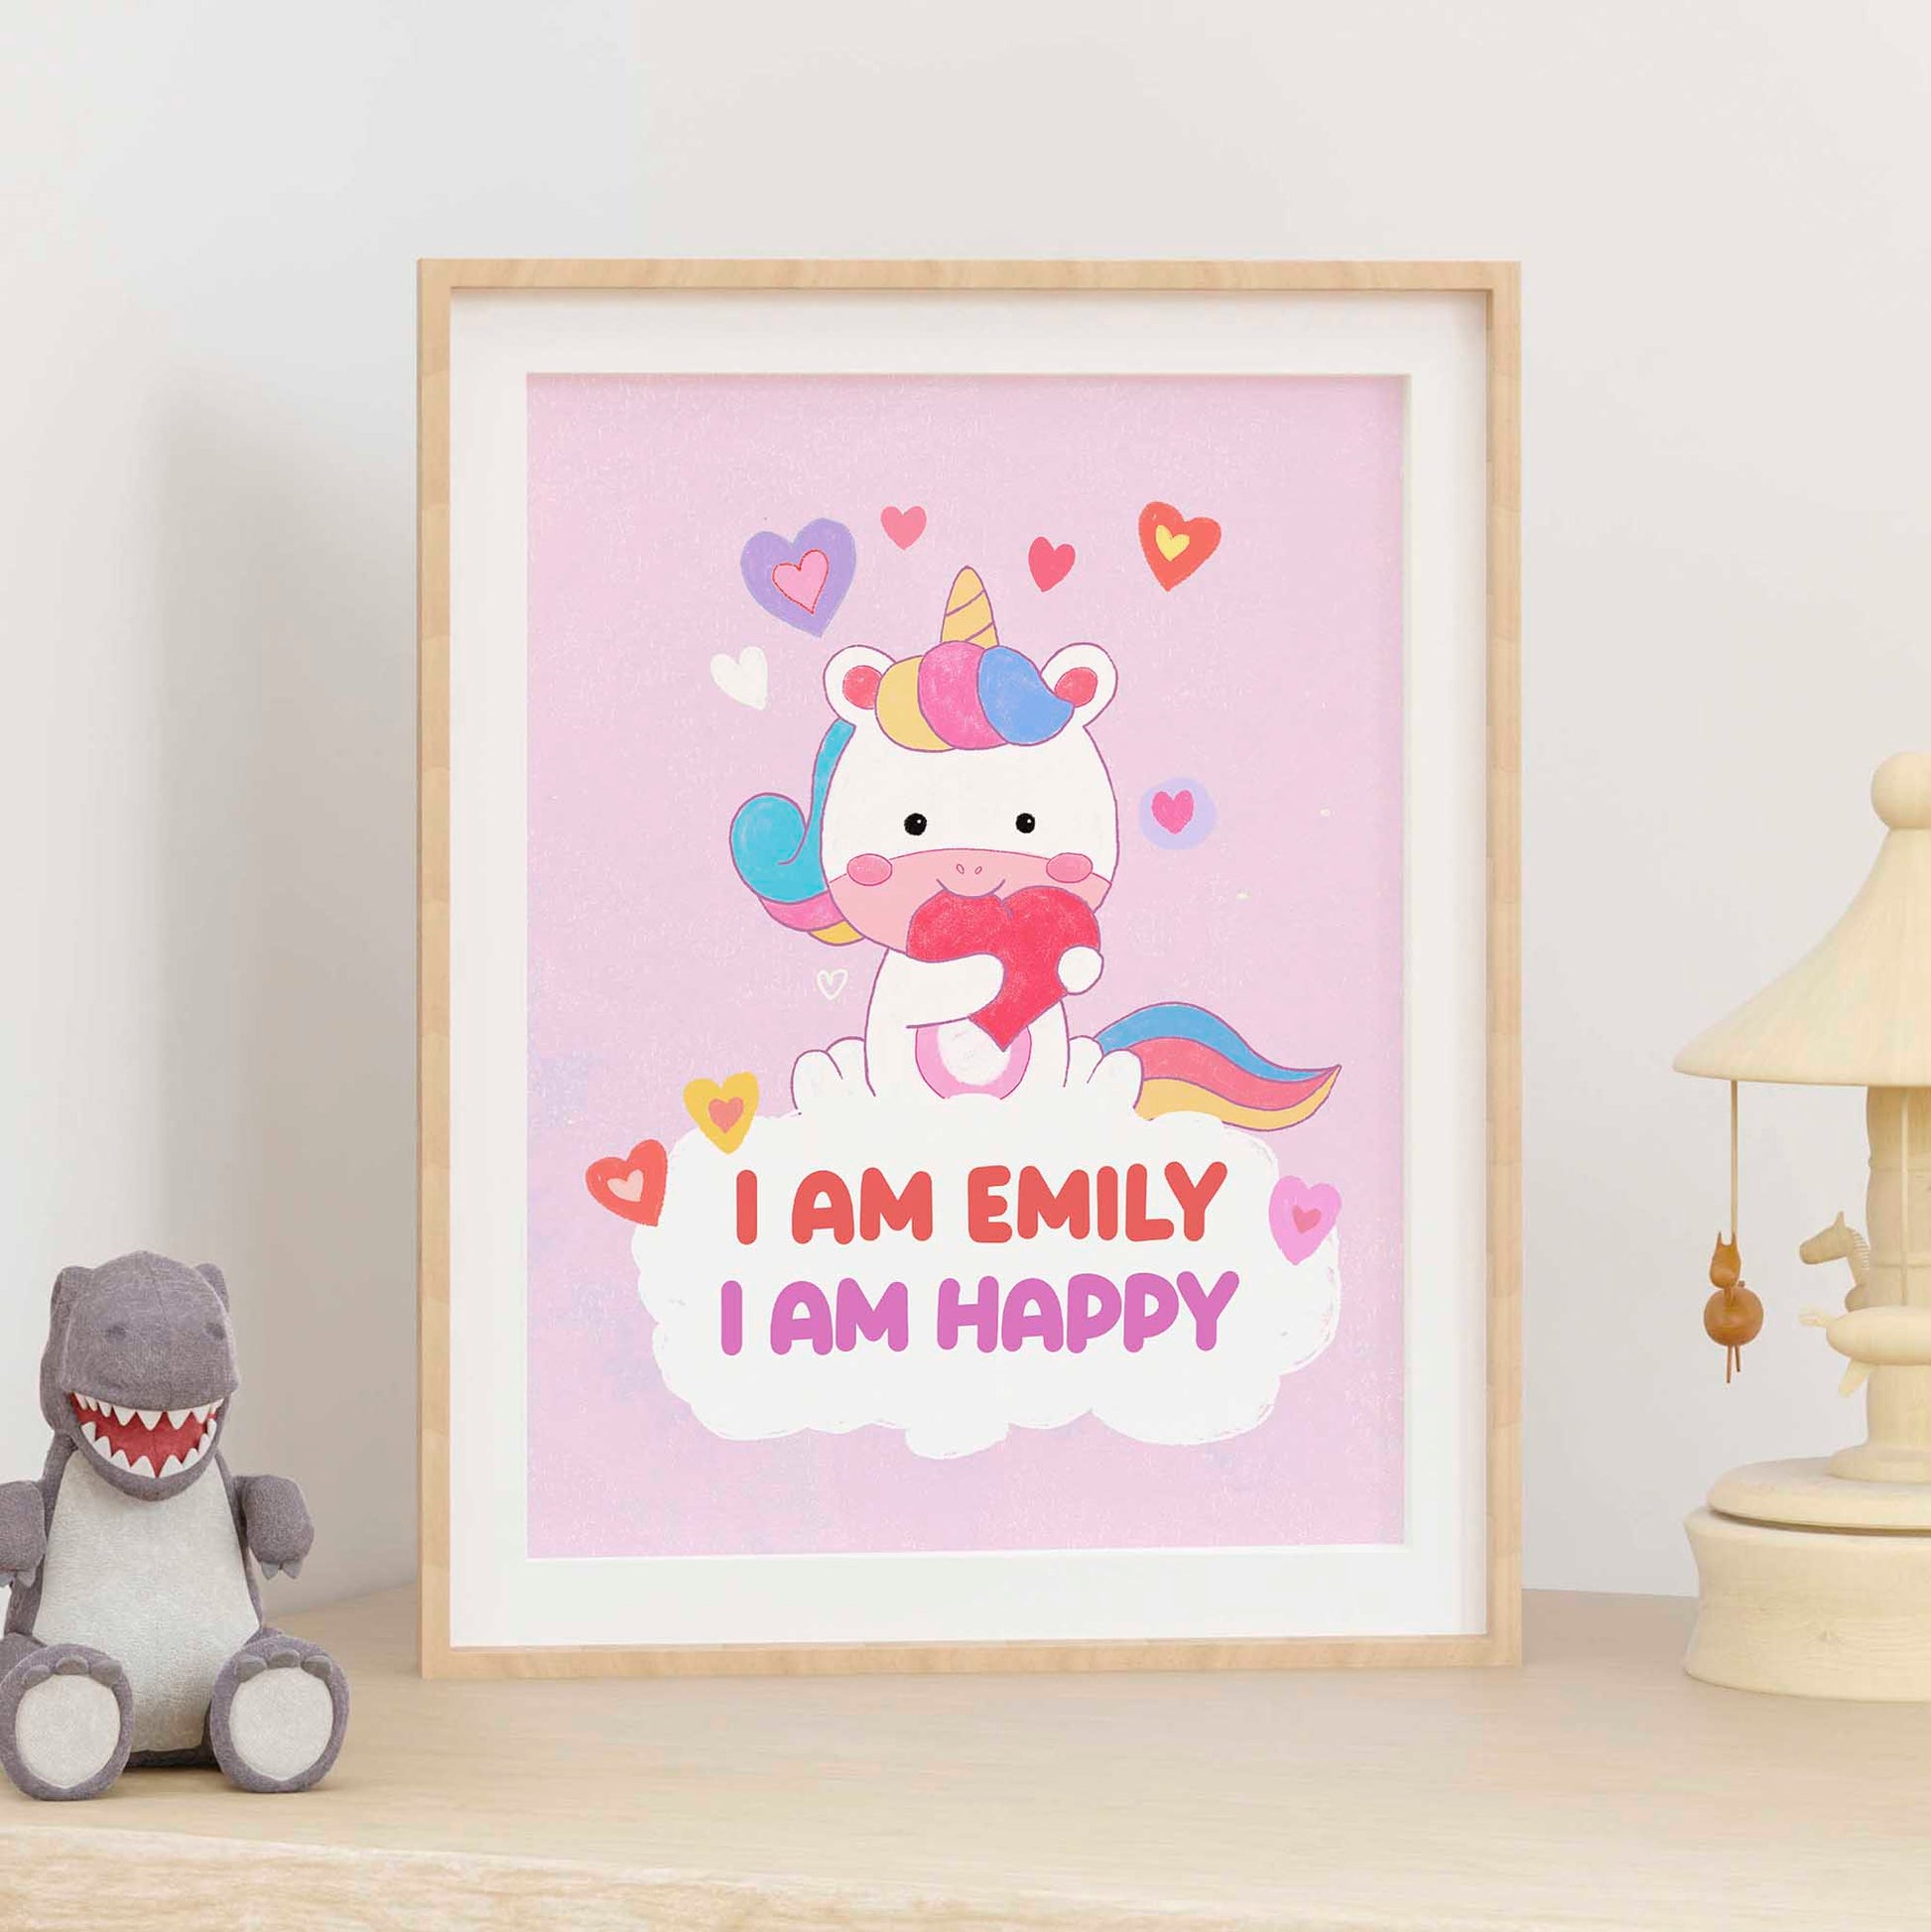 Adorable unicorn art with inspiring messages, a delightful addition to nursery decor.